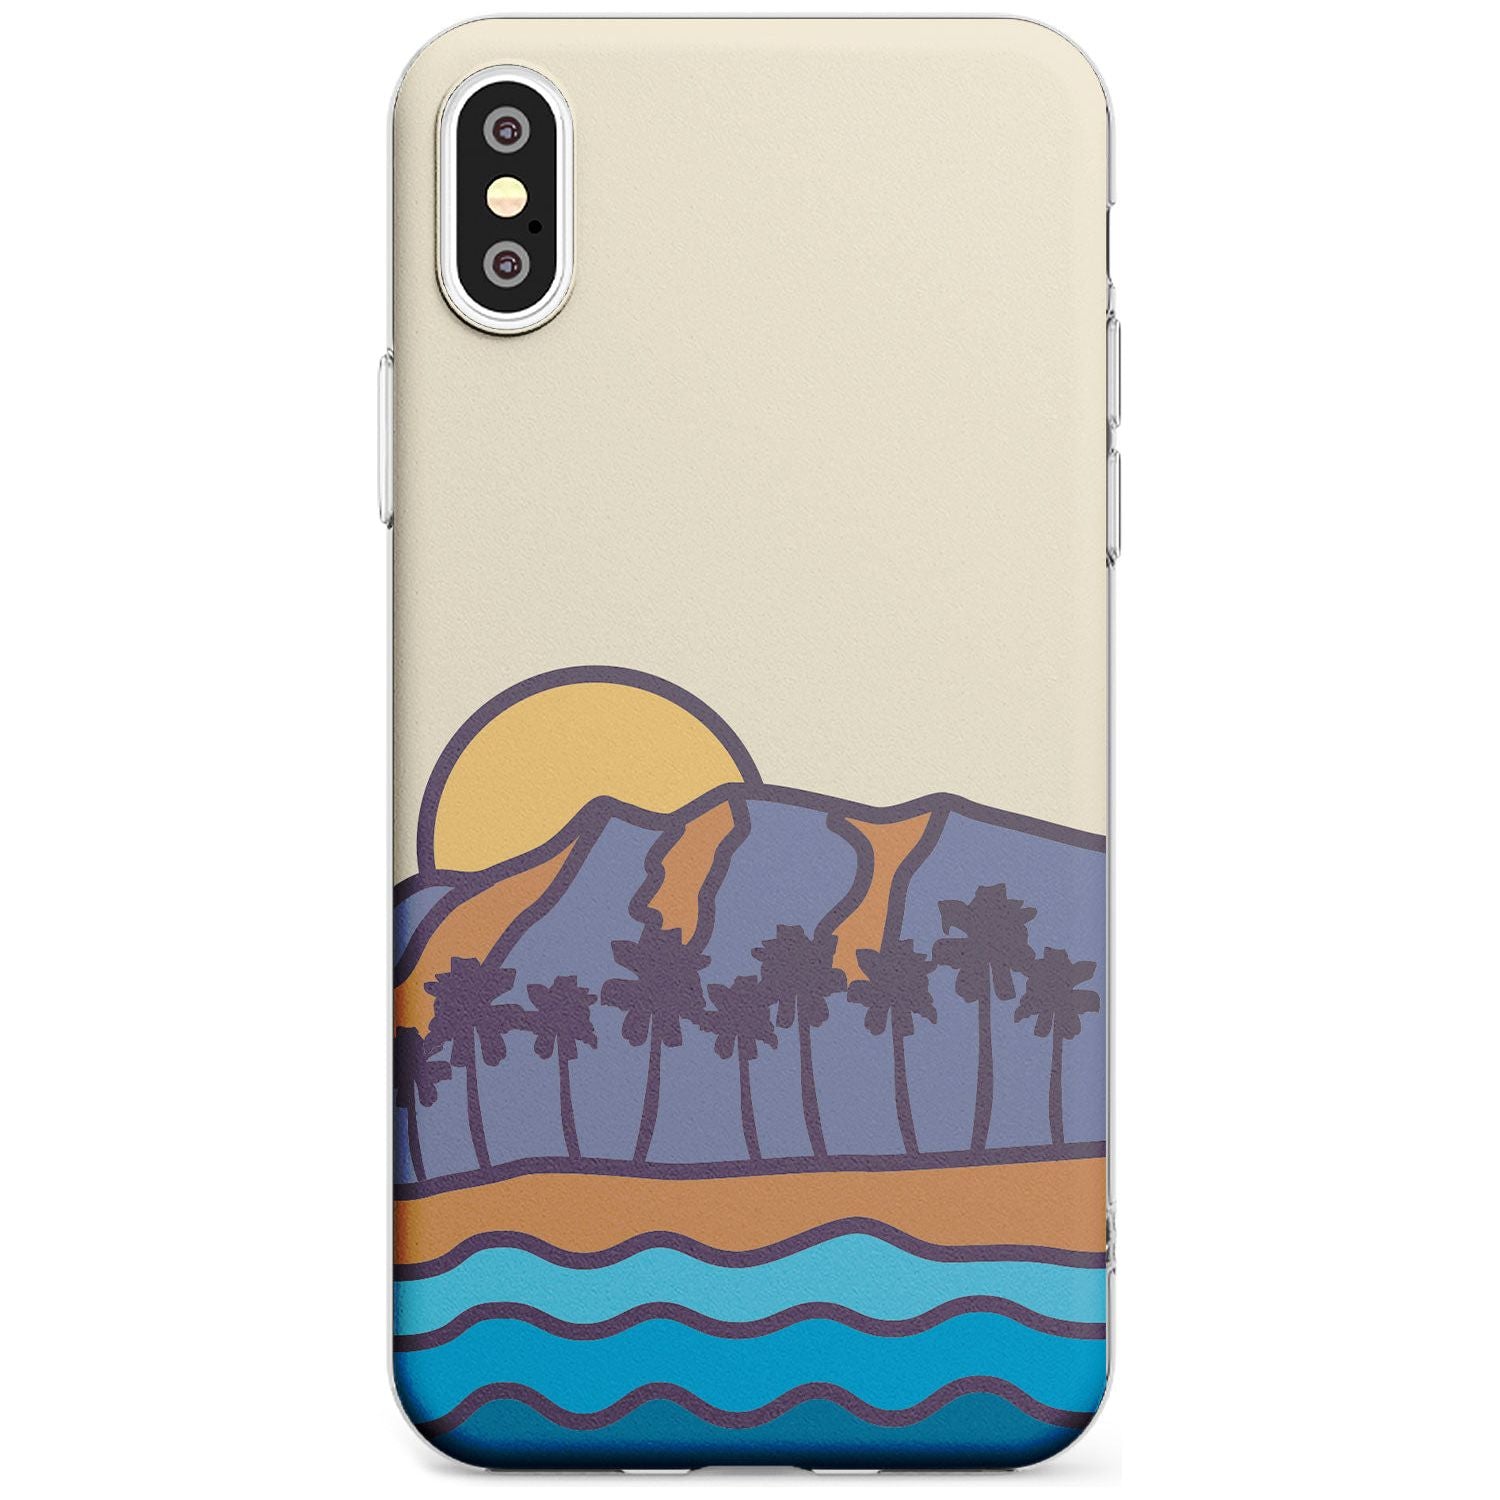 South Sunset Black Impact Phone Case for iPhone X XS Max XR